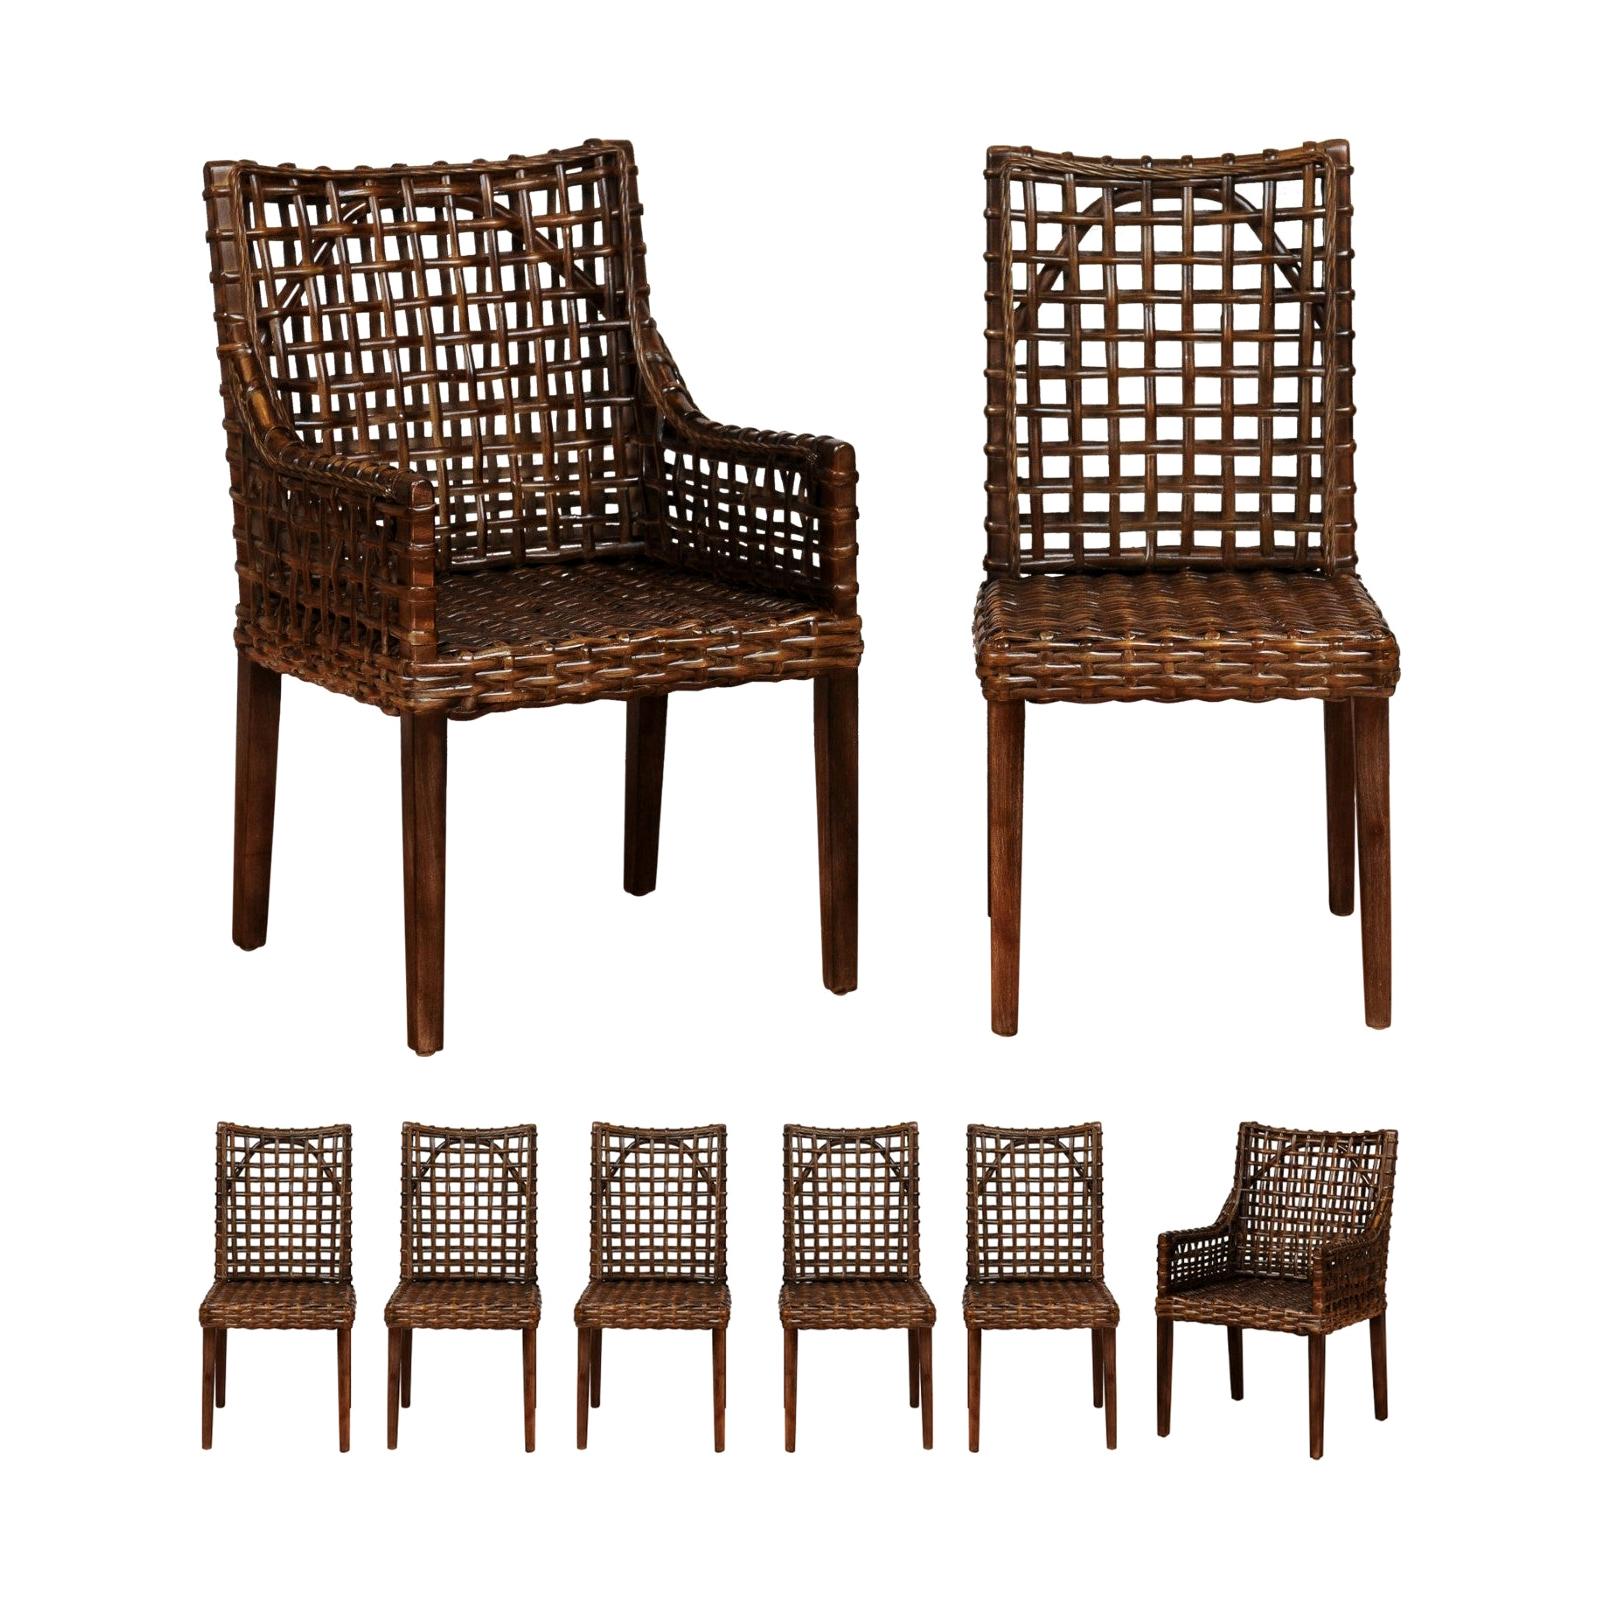 Superb Set of 8 Cerused Mahogany and Cane Dining Chairs in Aged Tobacco